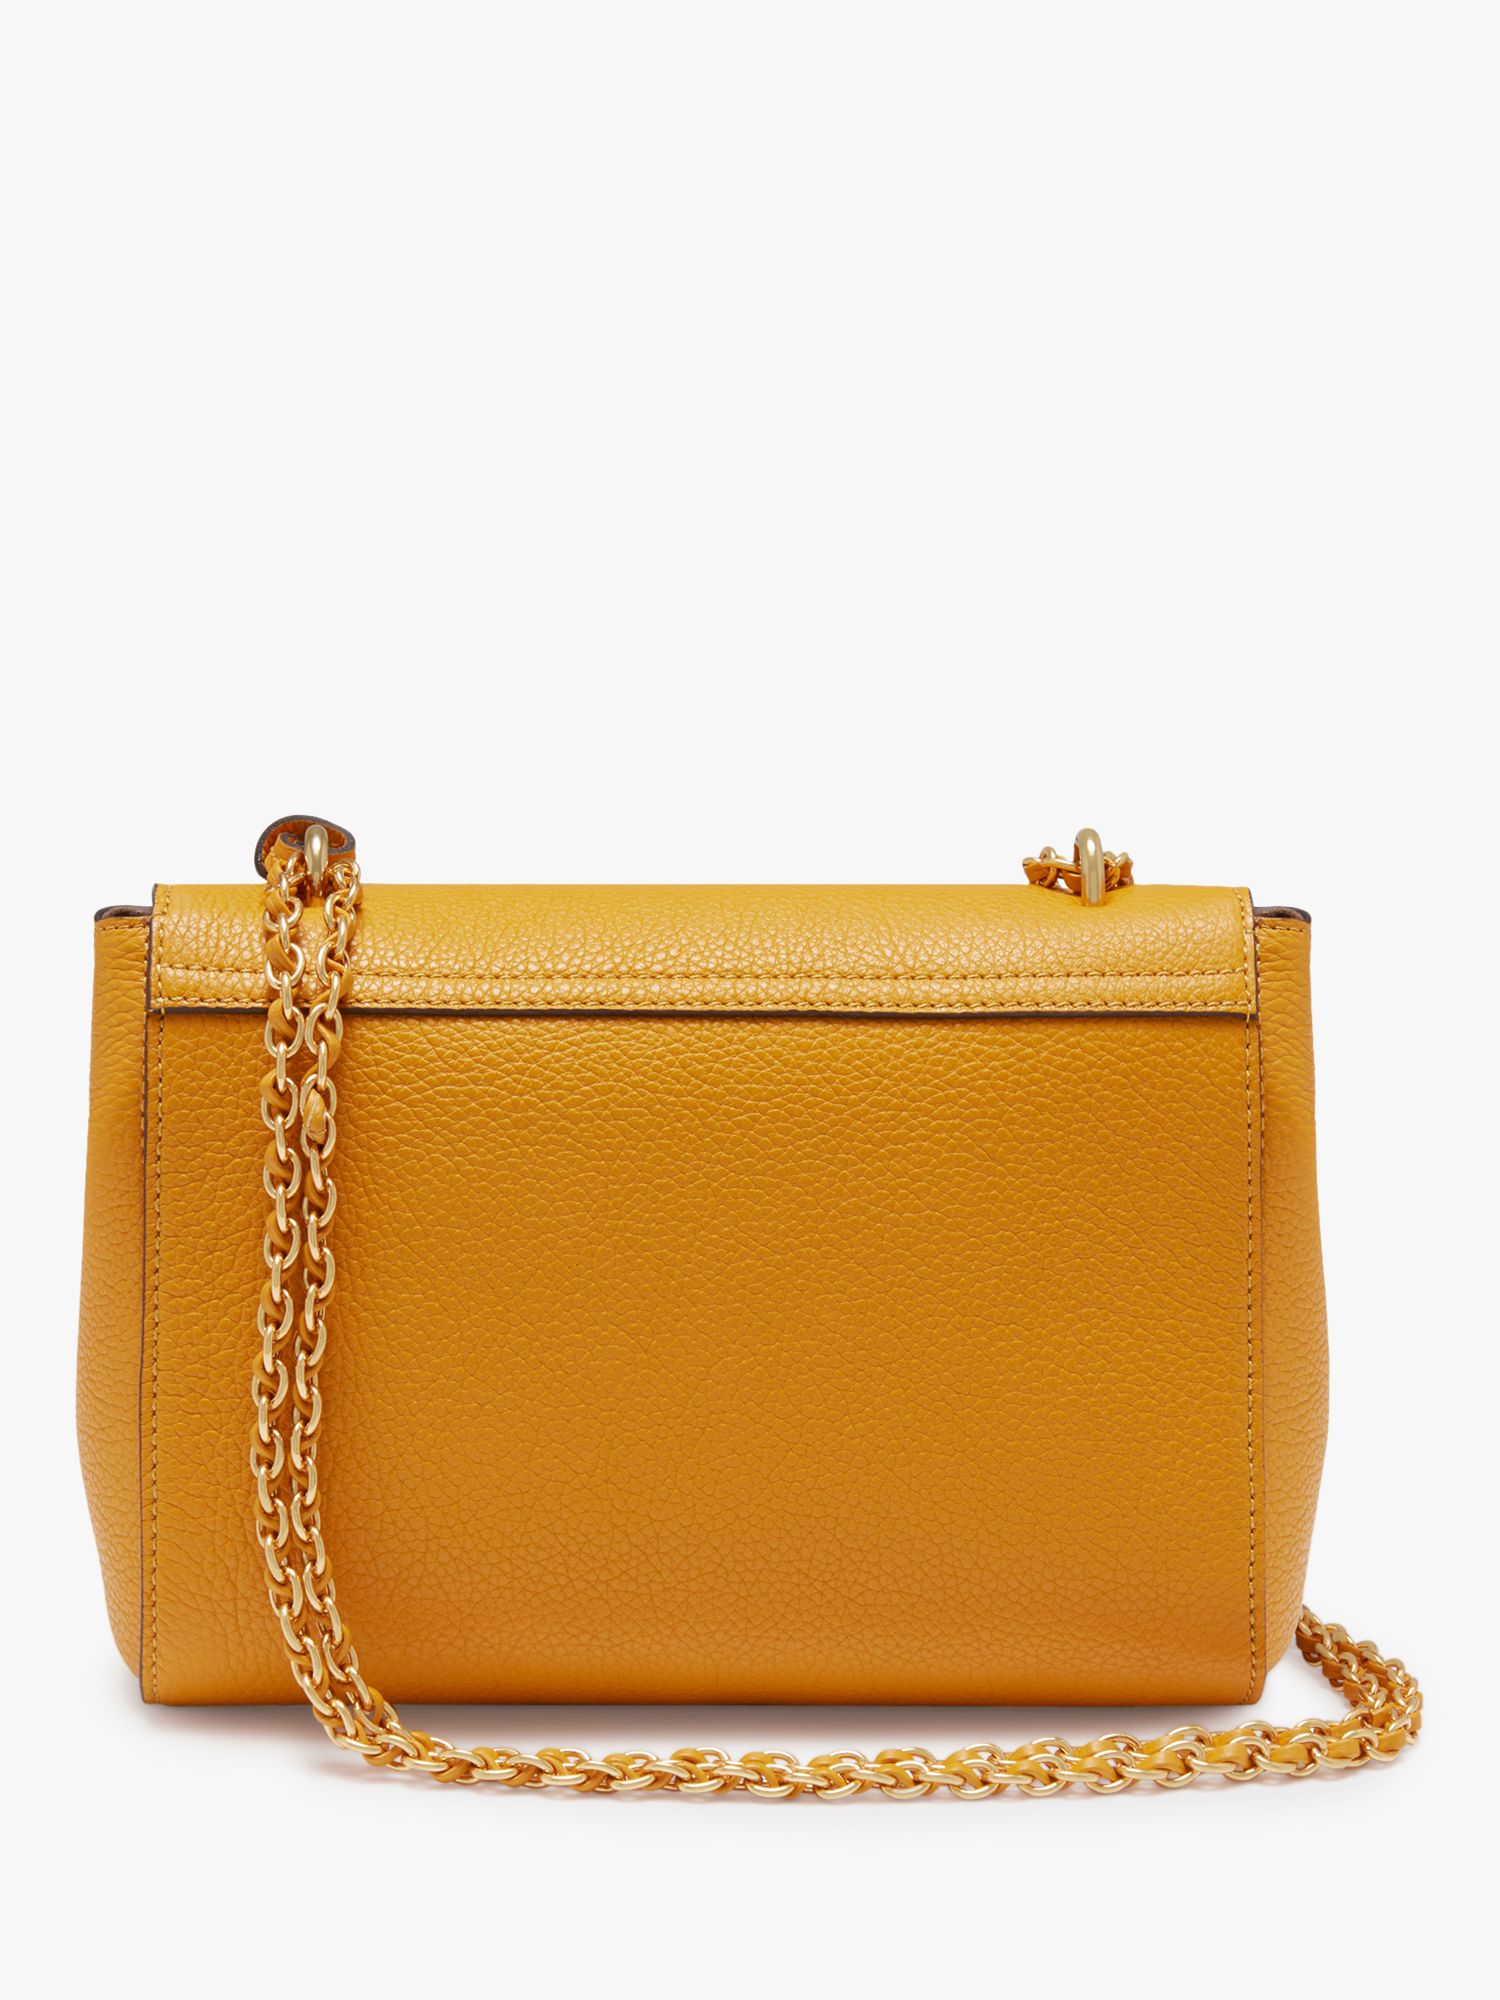 Mulberry Lily Small Classic Grain Leather Cross Body Bag